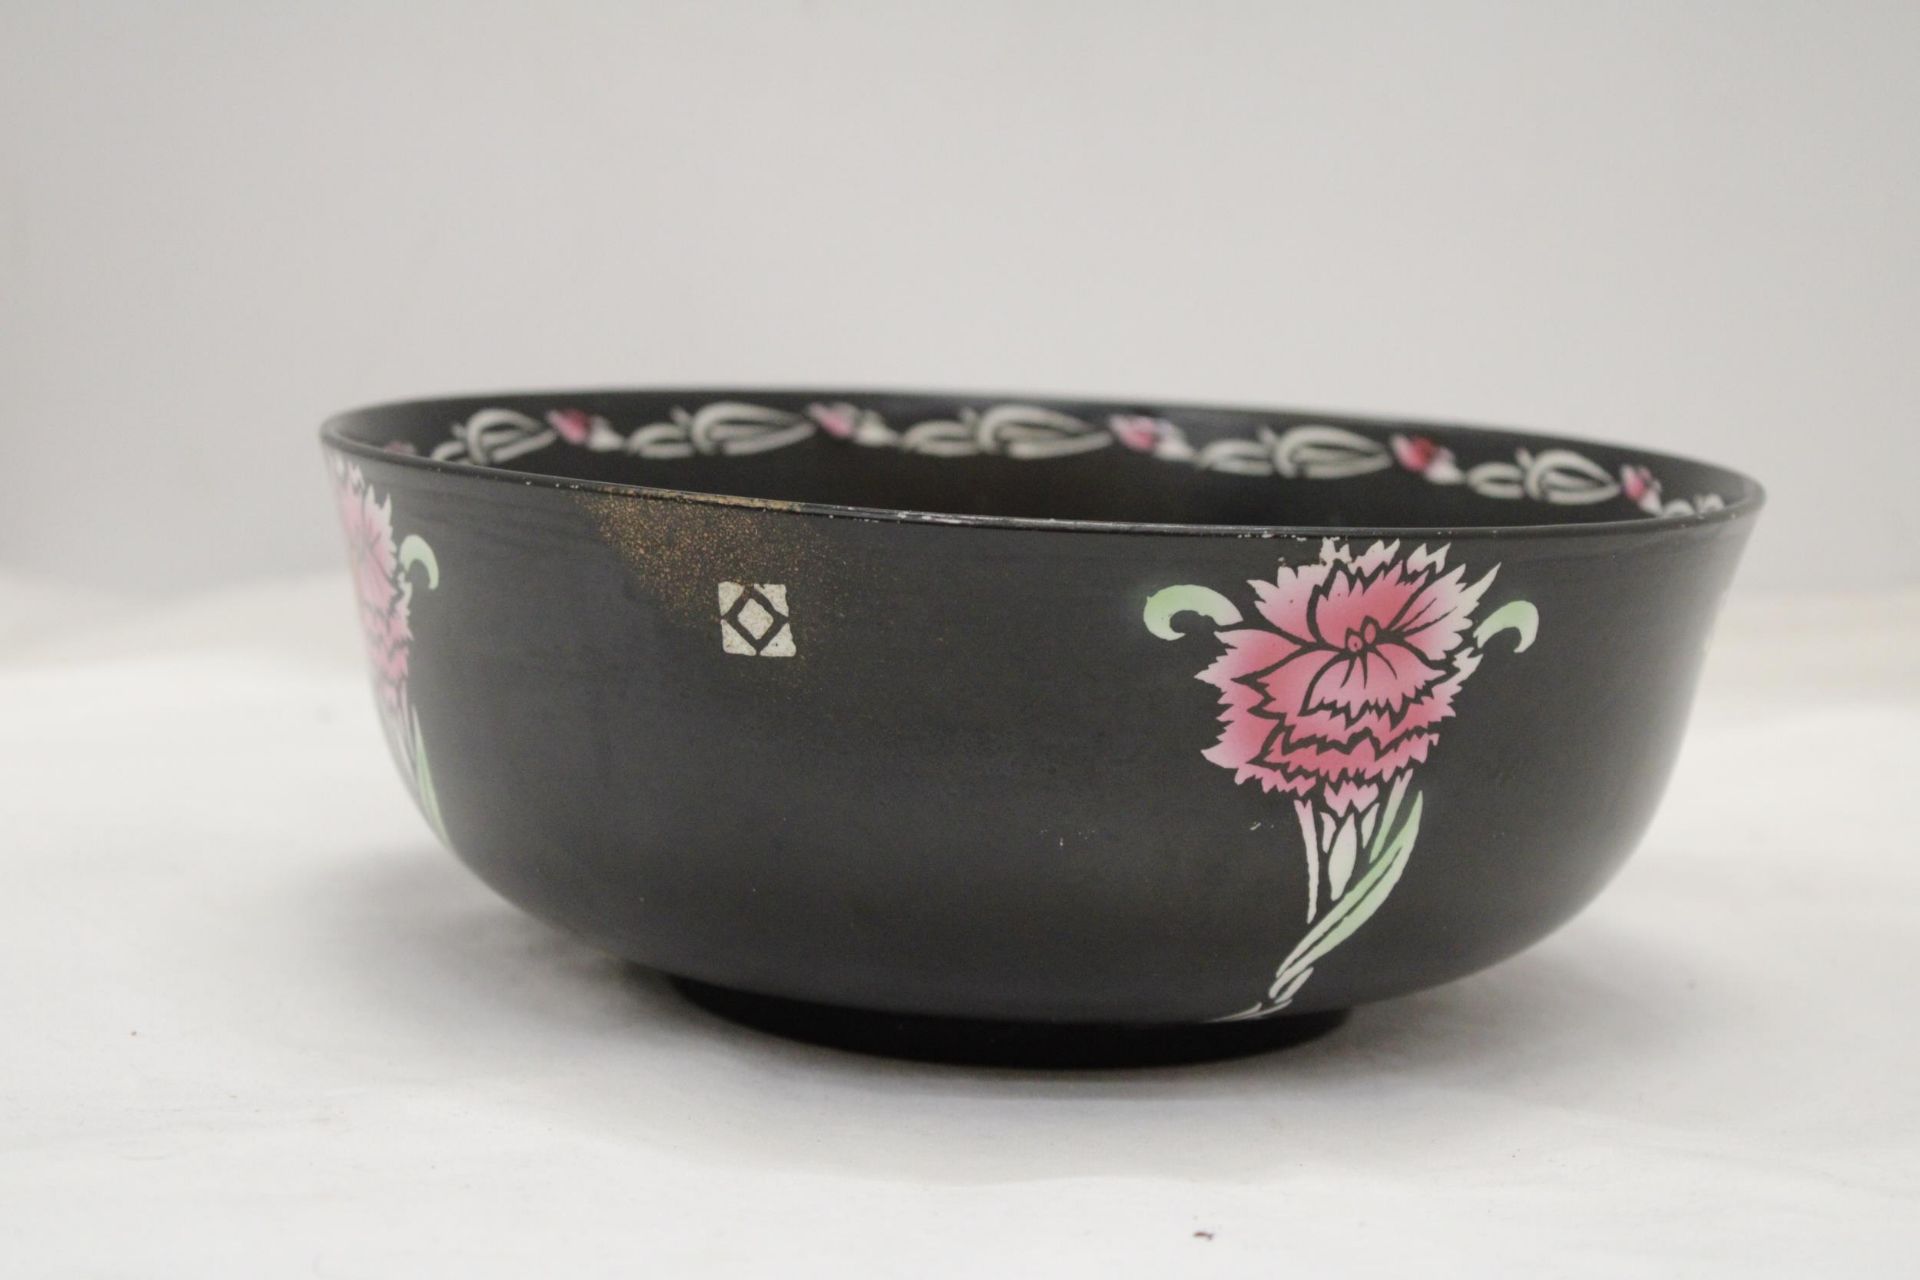 A VINTAGE SHELLEY BOWL, BLACK WITH FLORAL PATTERN, DIAMETER 24CM, SOME PAINTED RUBBED OFF FROM THE - Image 2 of 5